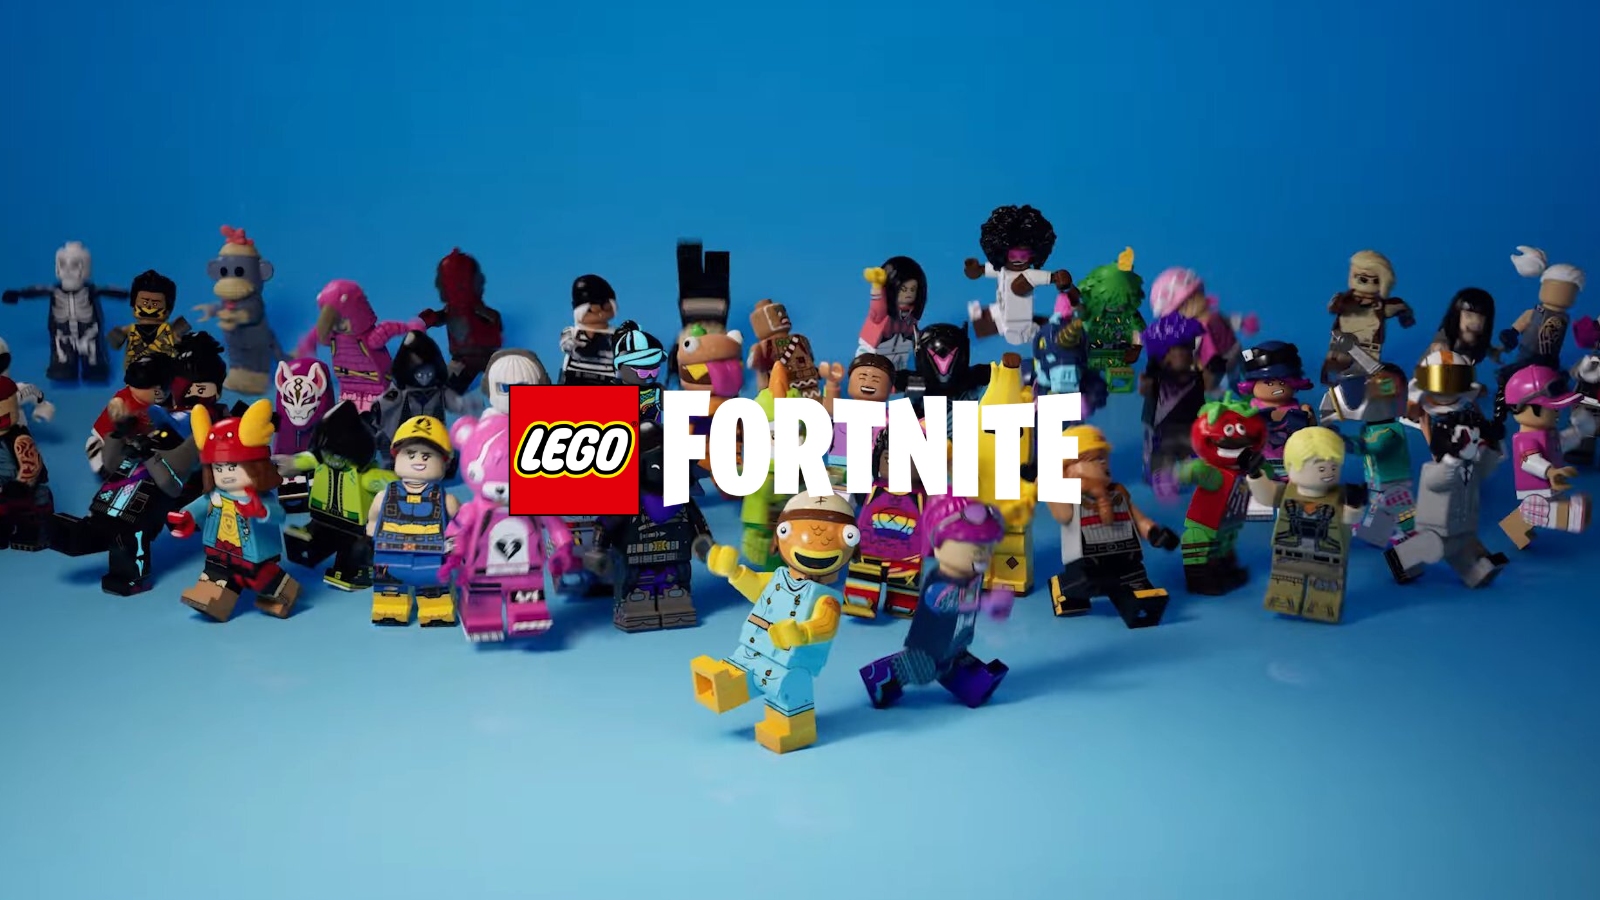 How to connect your LEGO account to Fortnite